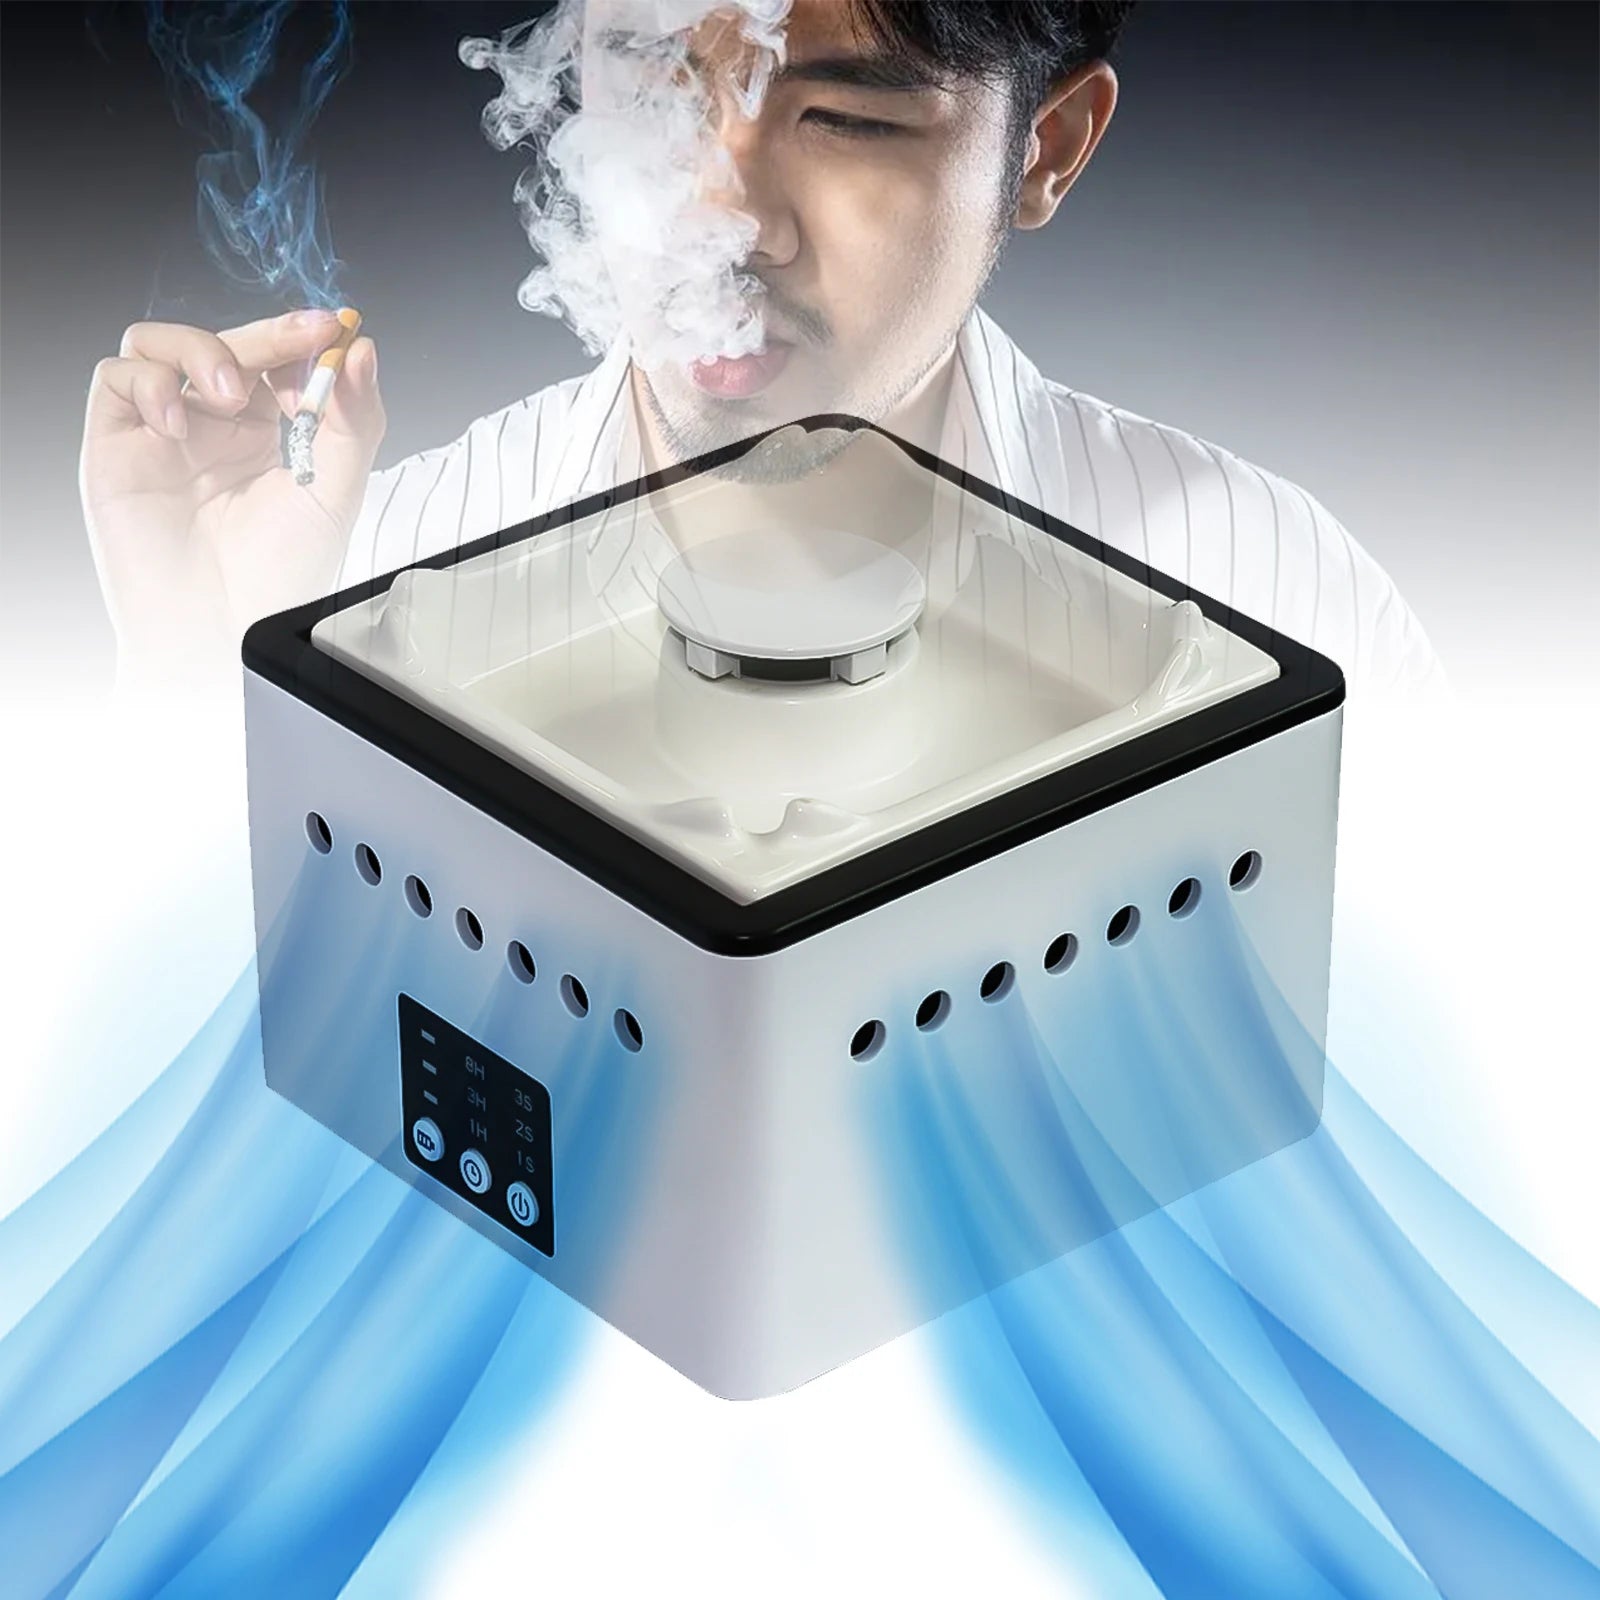 Ultra Max Luxury Smokeless Ashtray Powerful Negative Ion Rechargeable